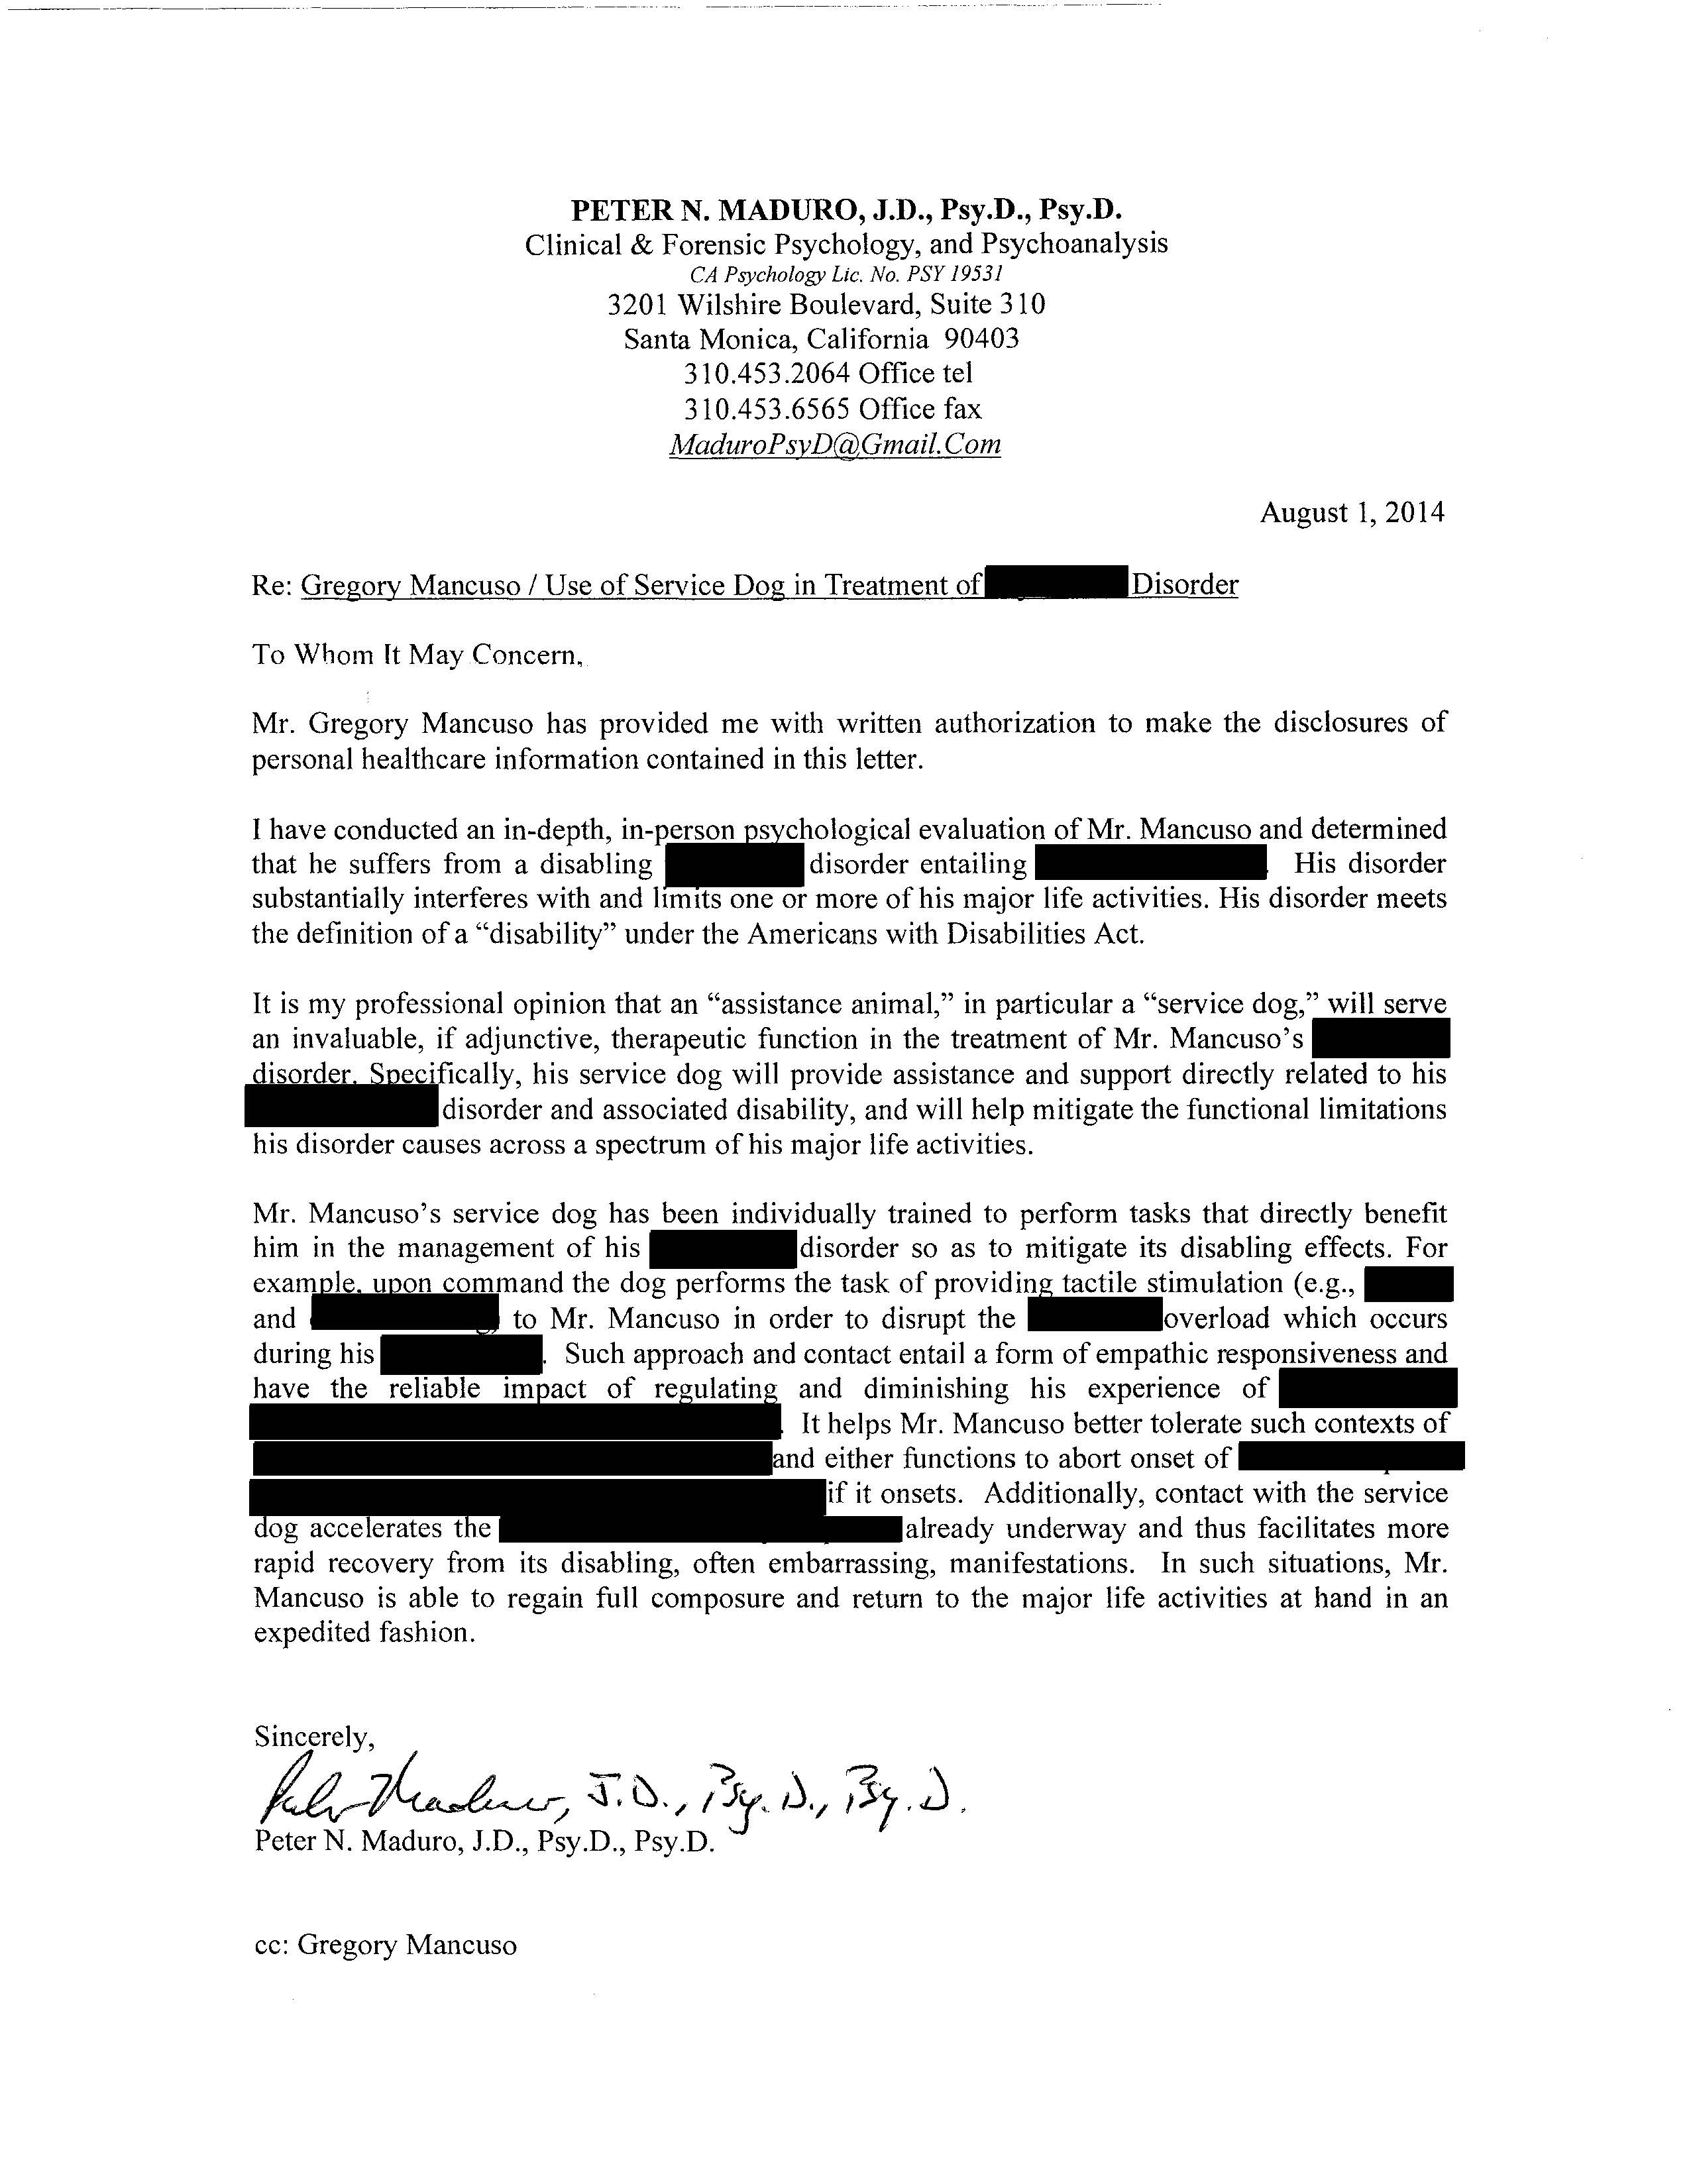 Service Dog Letter - Dr Peter Maduro_Redacted